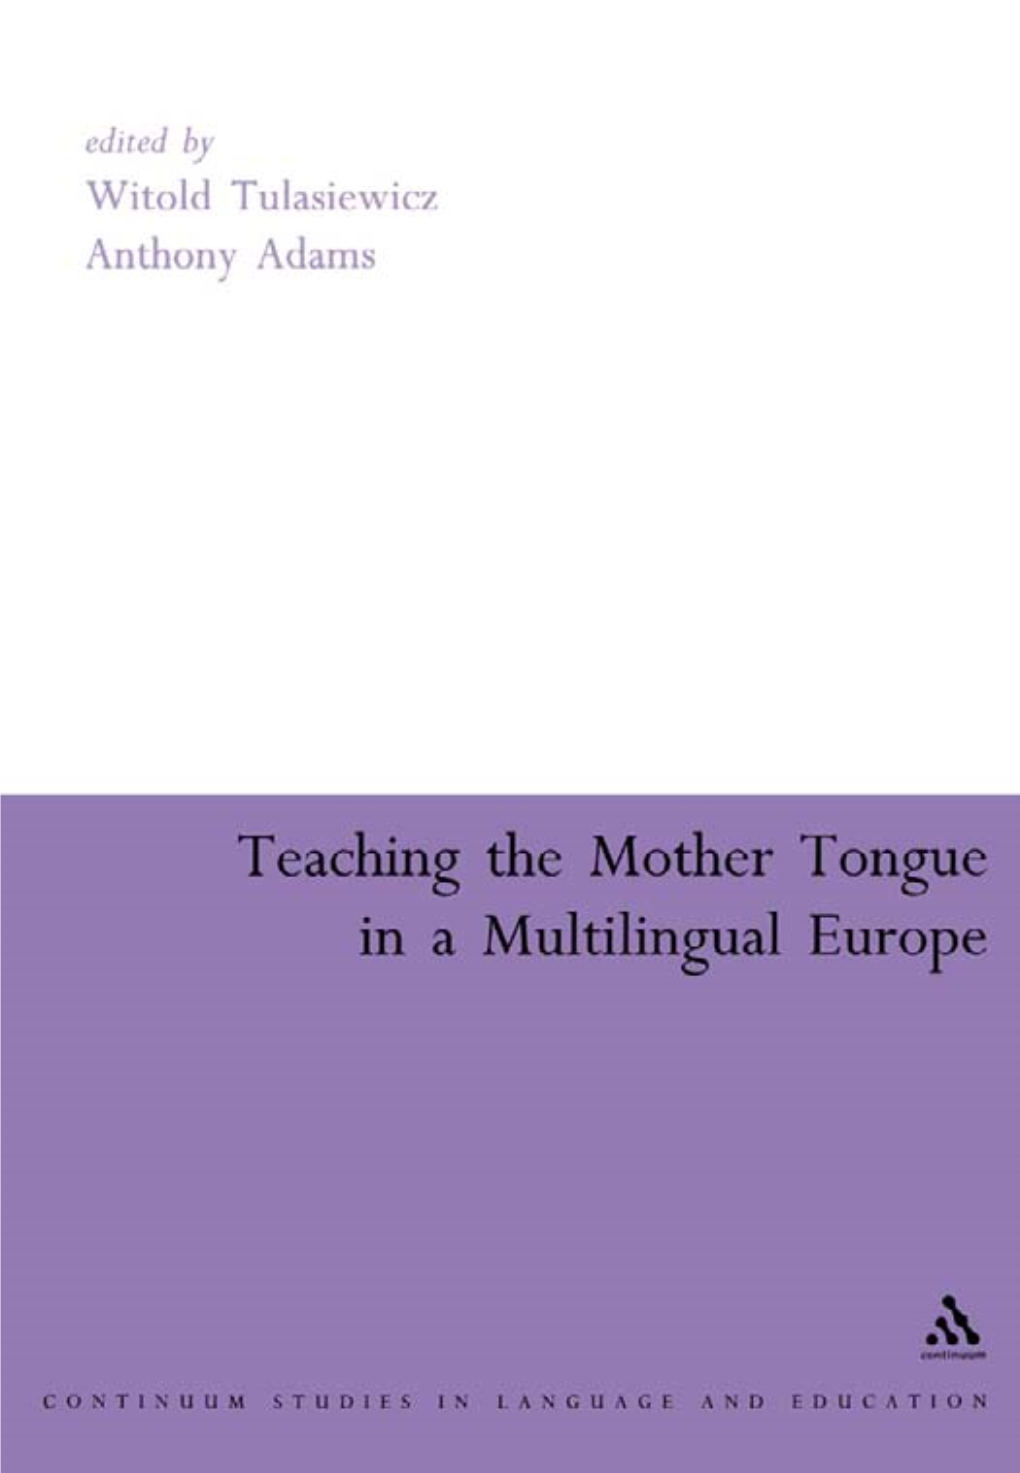 TEACHING the MOTHER TONGUE in a MULTILINGUAL EUROPE This Page Intentionally Left Blank Teaching the Mother Tongue in a Multilingual Europe